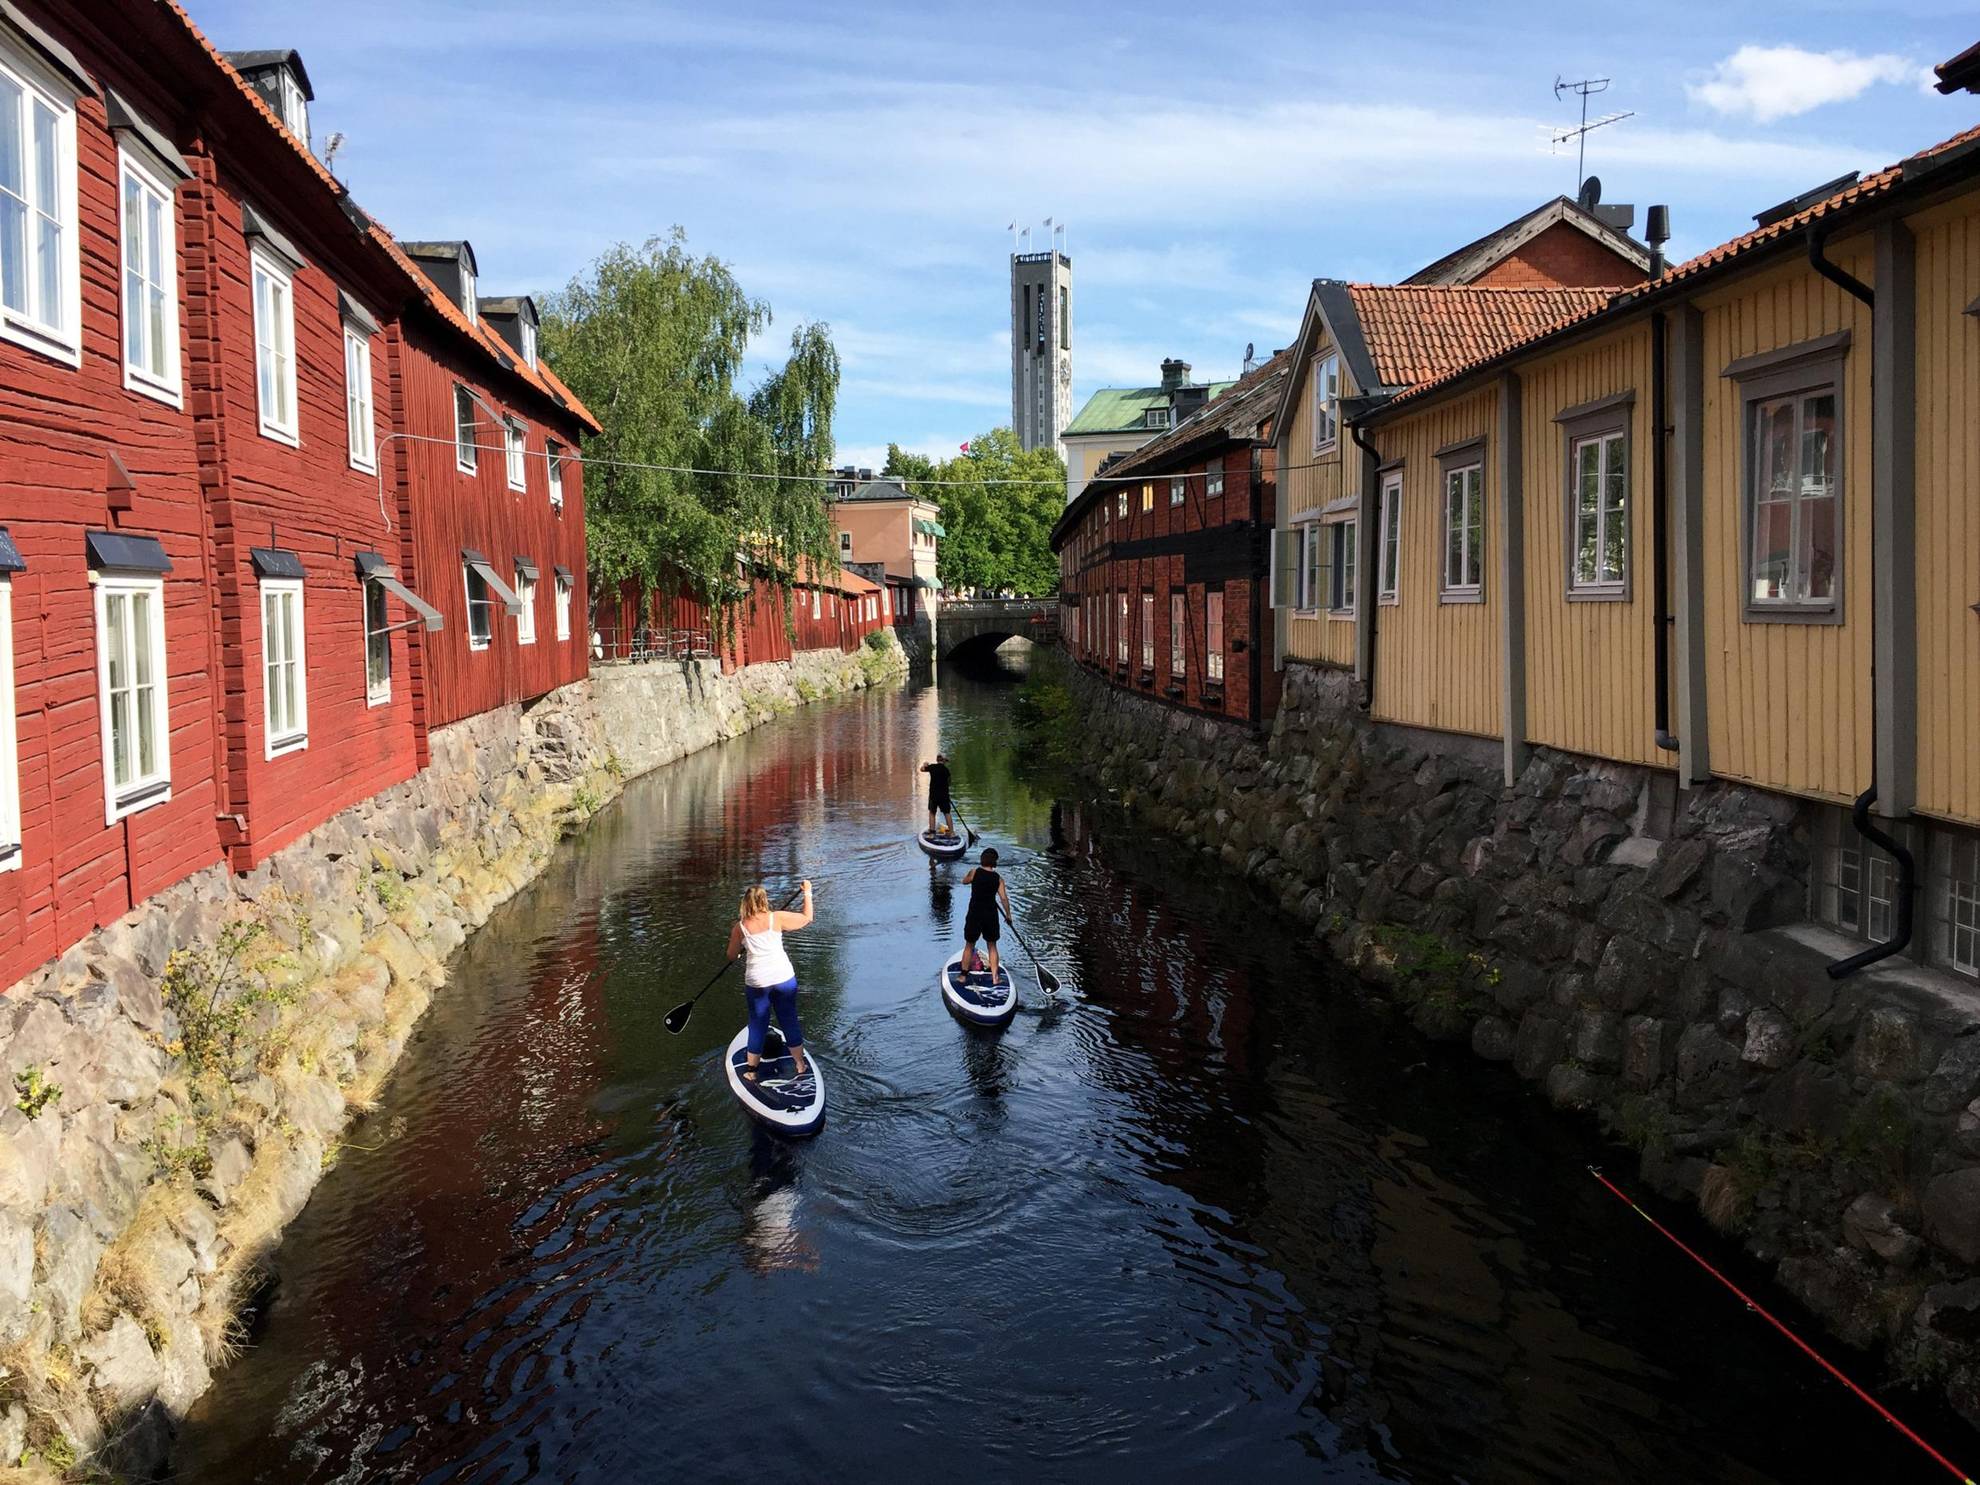 Three people paddle on stand up paddle boards in a canal with houses on each side.